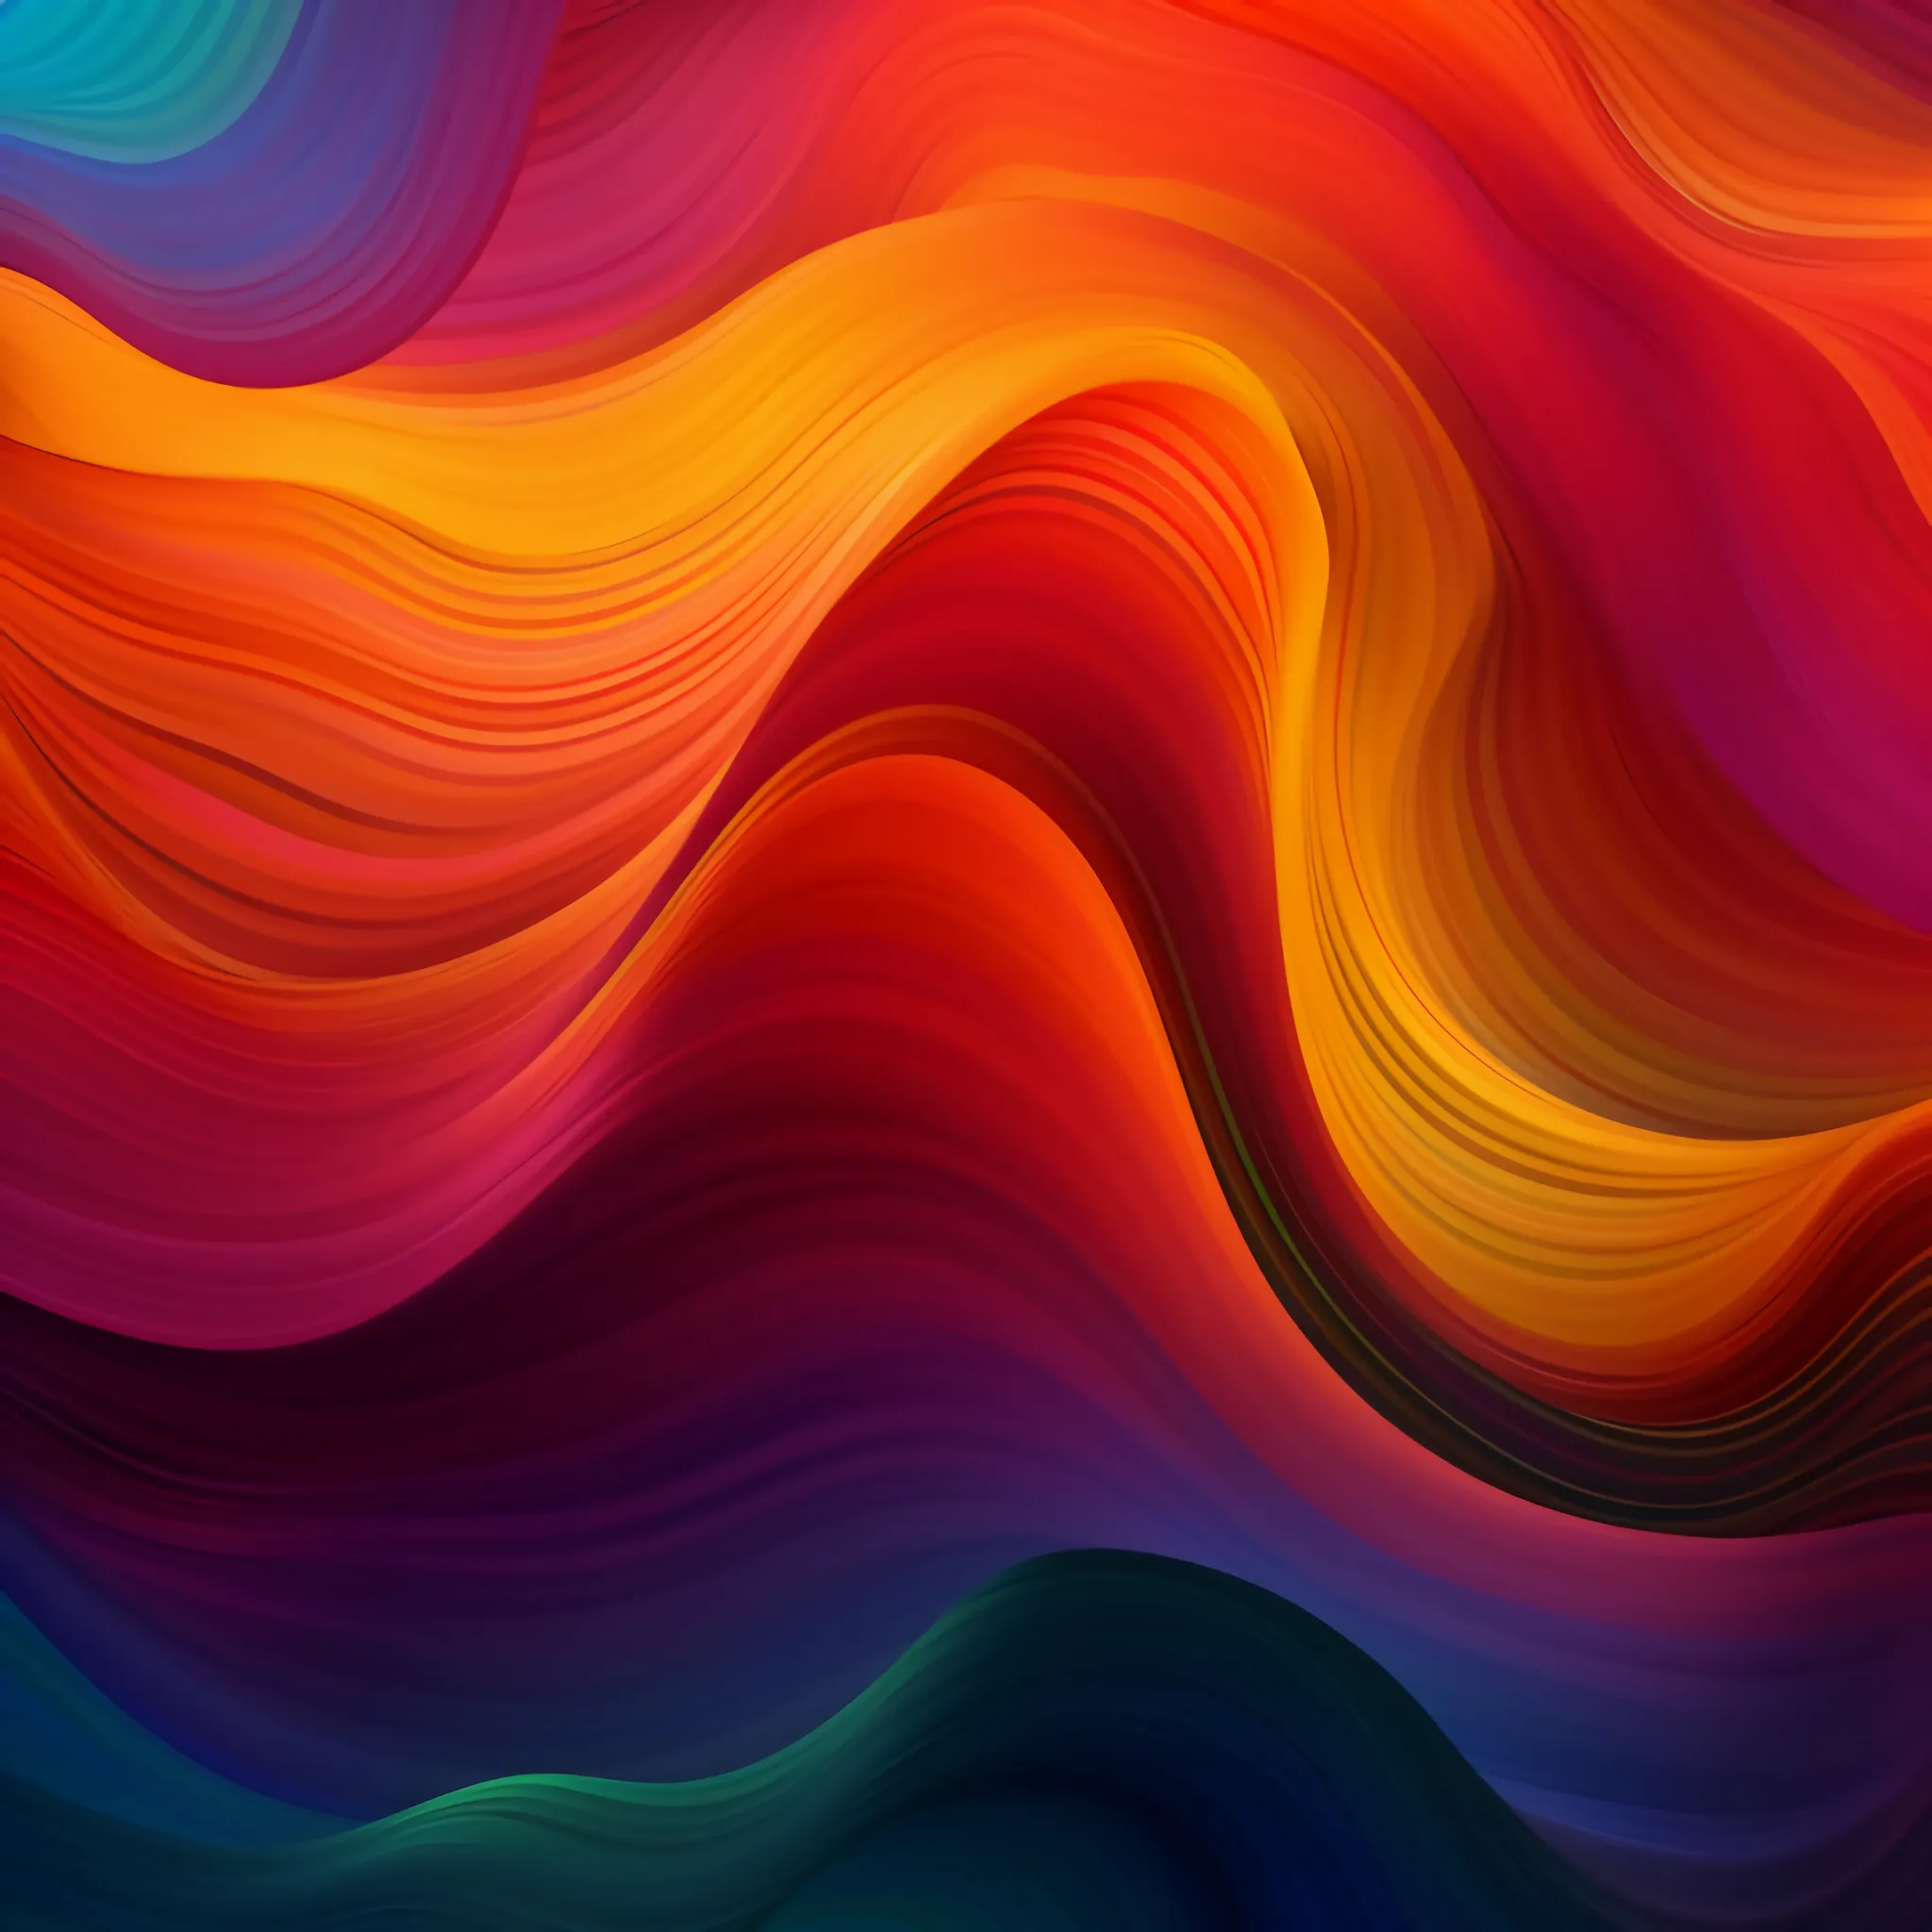 One of my random AI generated Wallpapers. Wave shaped colorful forms